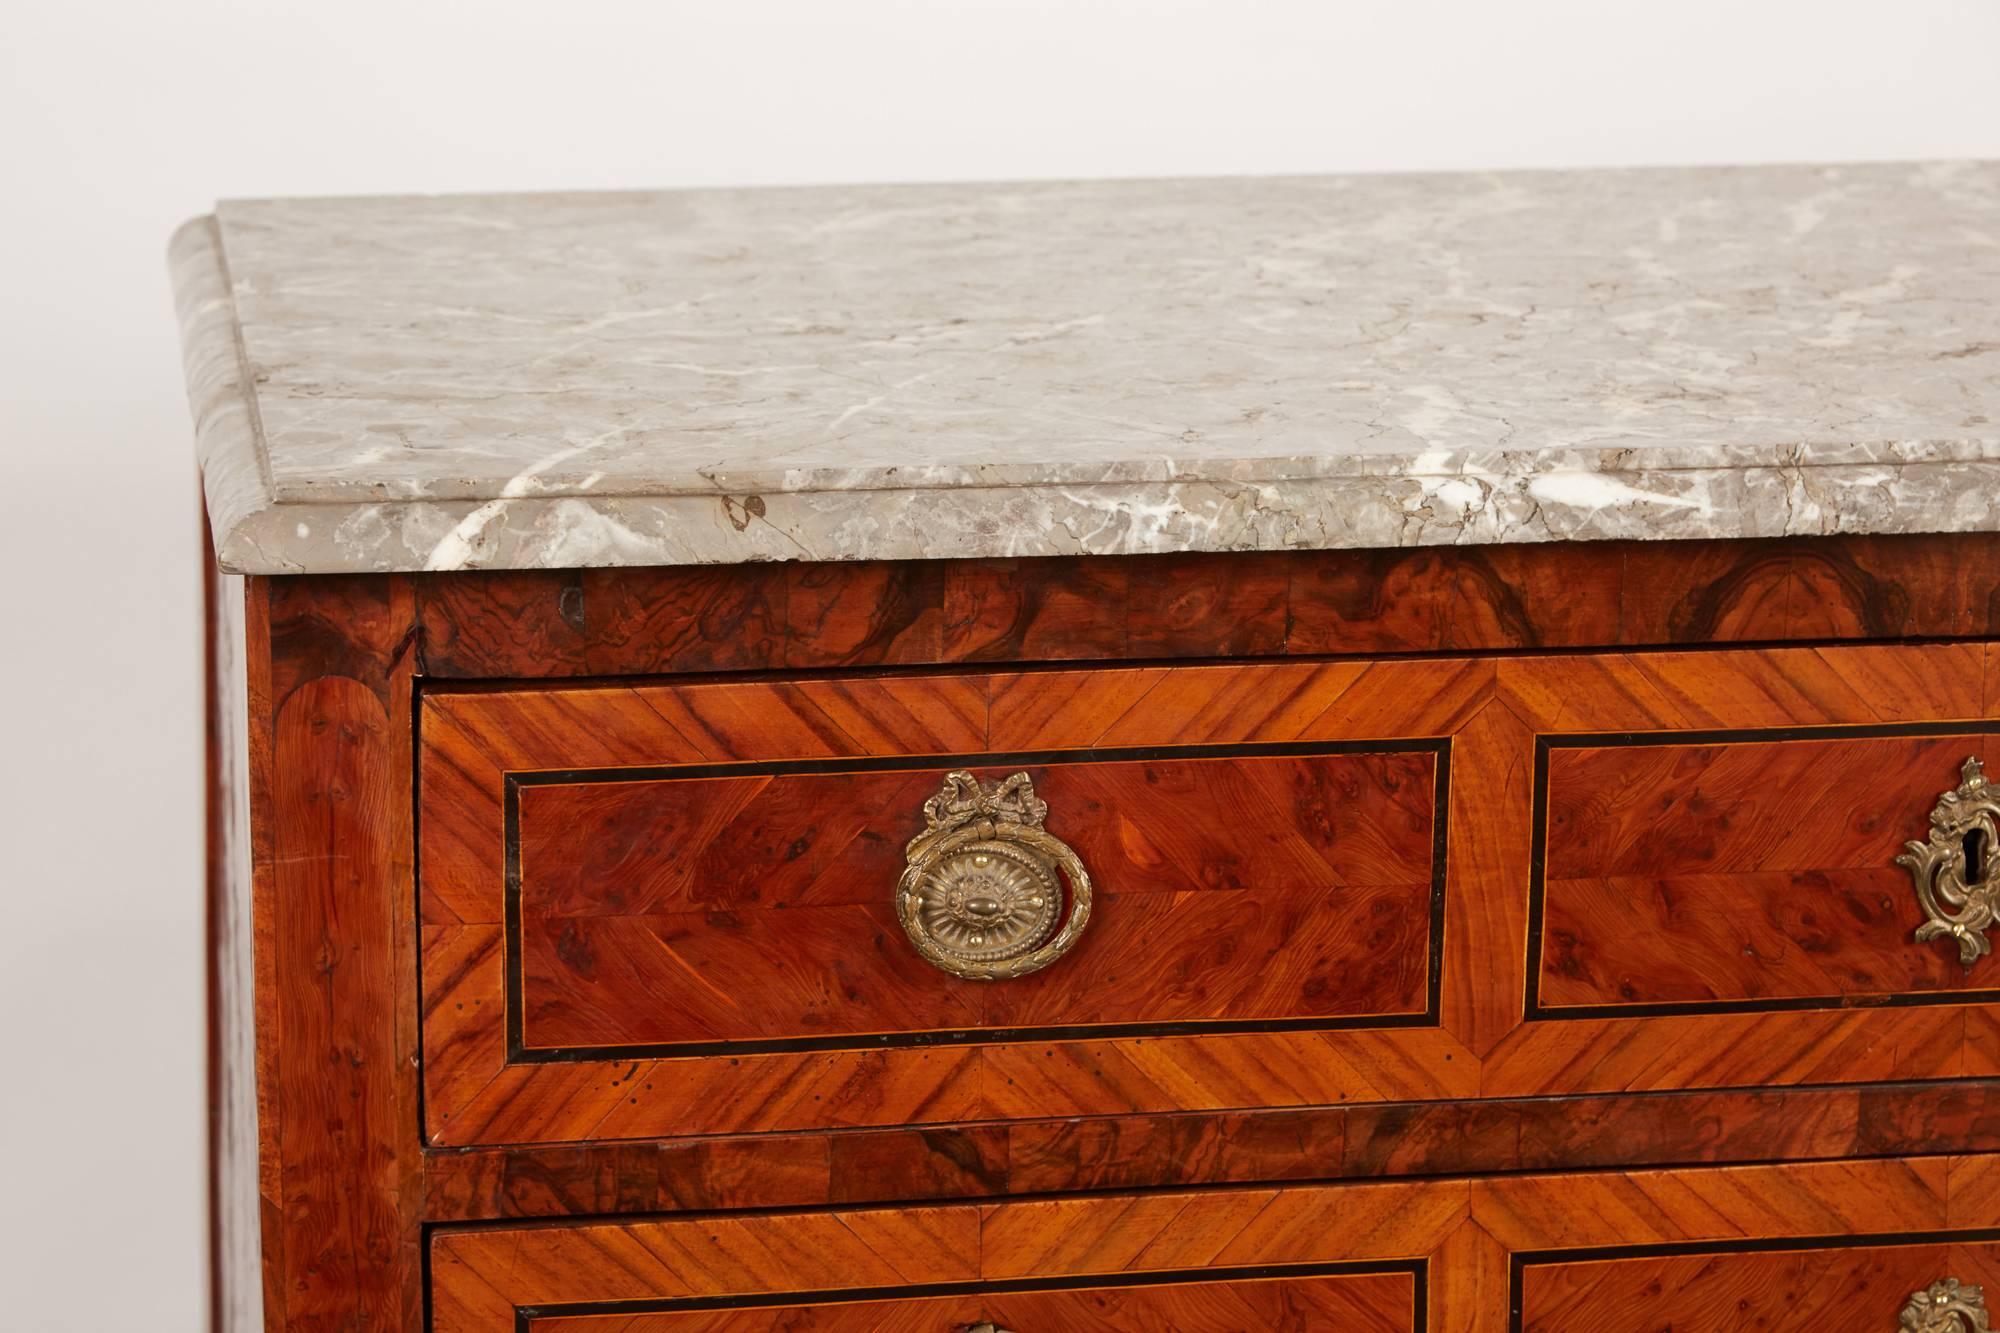 An 18th century Italian neoclassical style marble chest of drawers featuring contrasting marquetry inlay throughout the exterior as well as decorative rose colored paper lines throughout the drawer faces. The chest of drawers has a marble top with